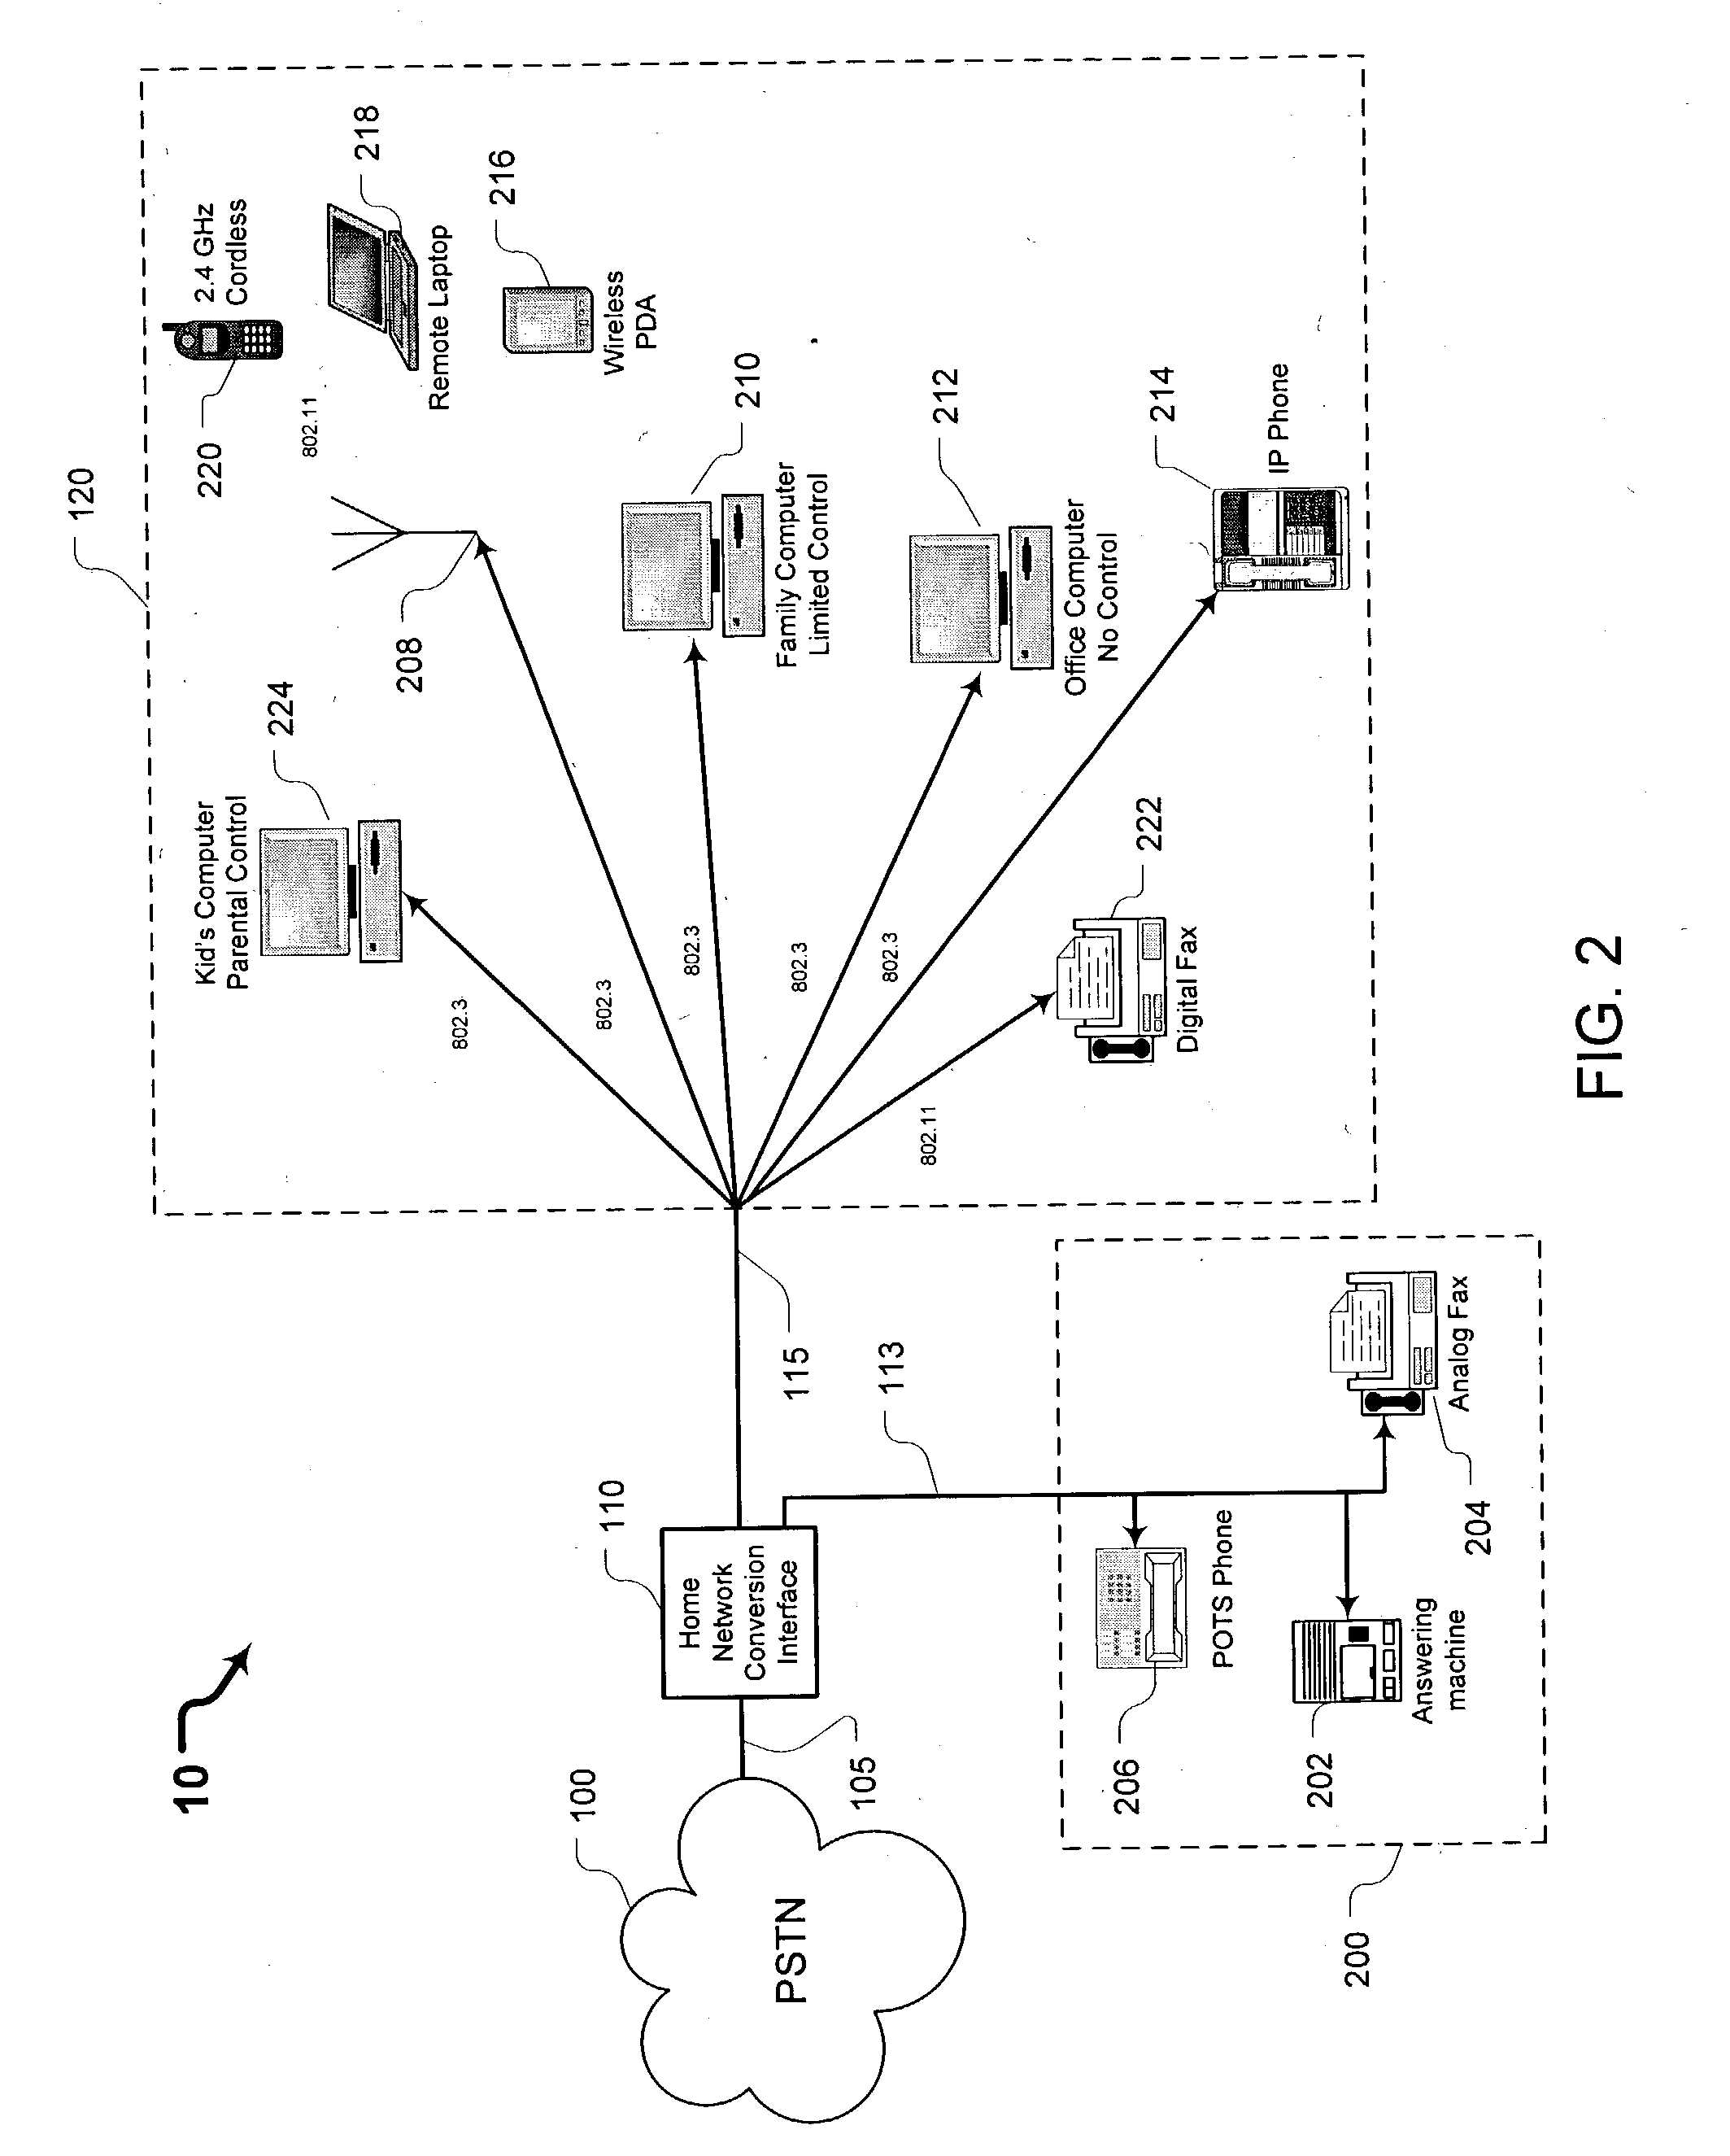 Systems and methods for providing a home network conversion interface